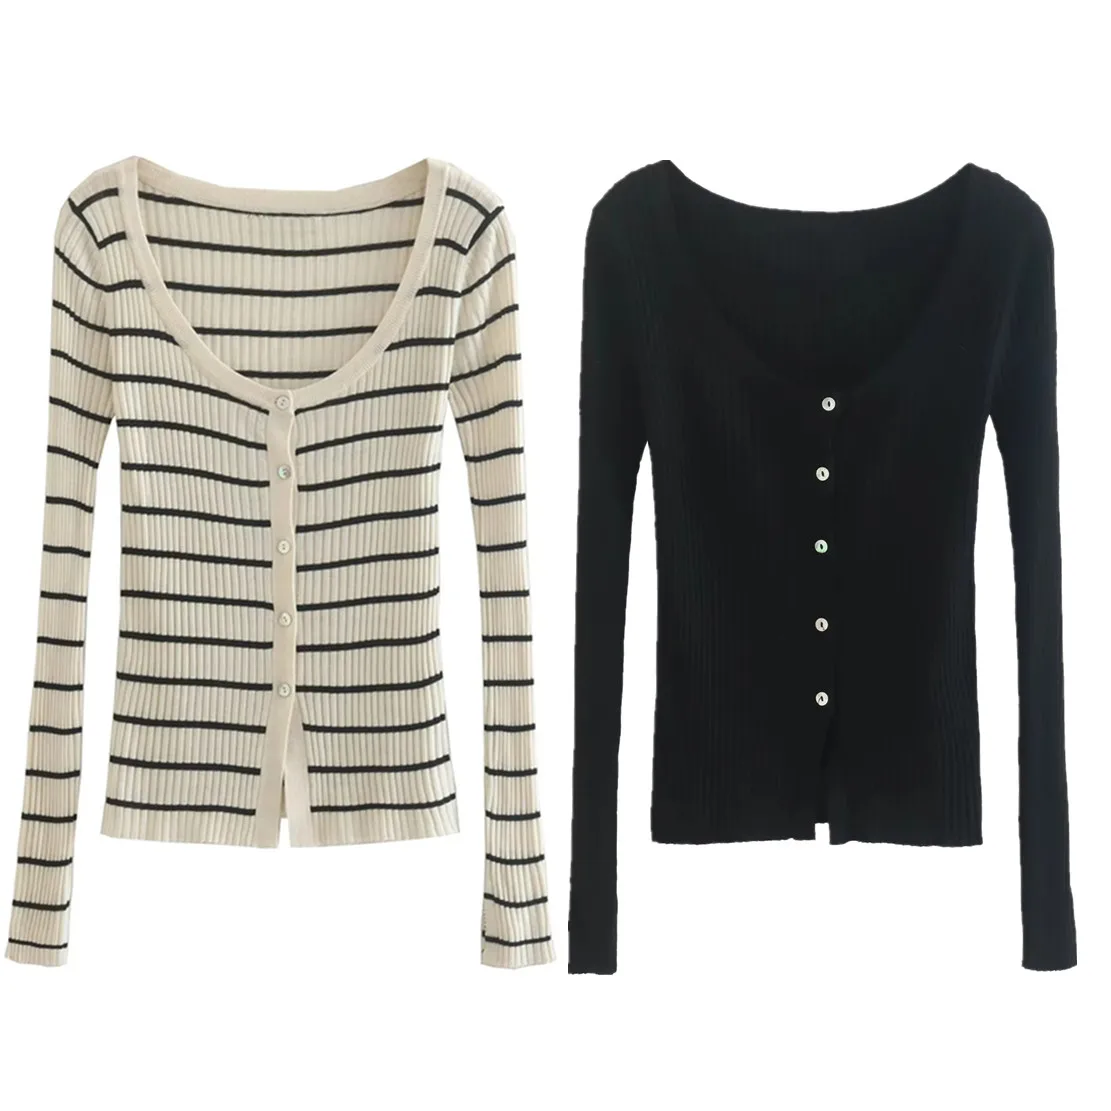 

Jenny&Dave England Style Fashion Office Lady Striped Knitwear Casual Rib Cardigans Women Tops